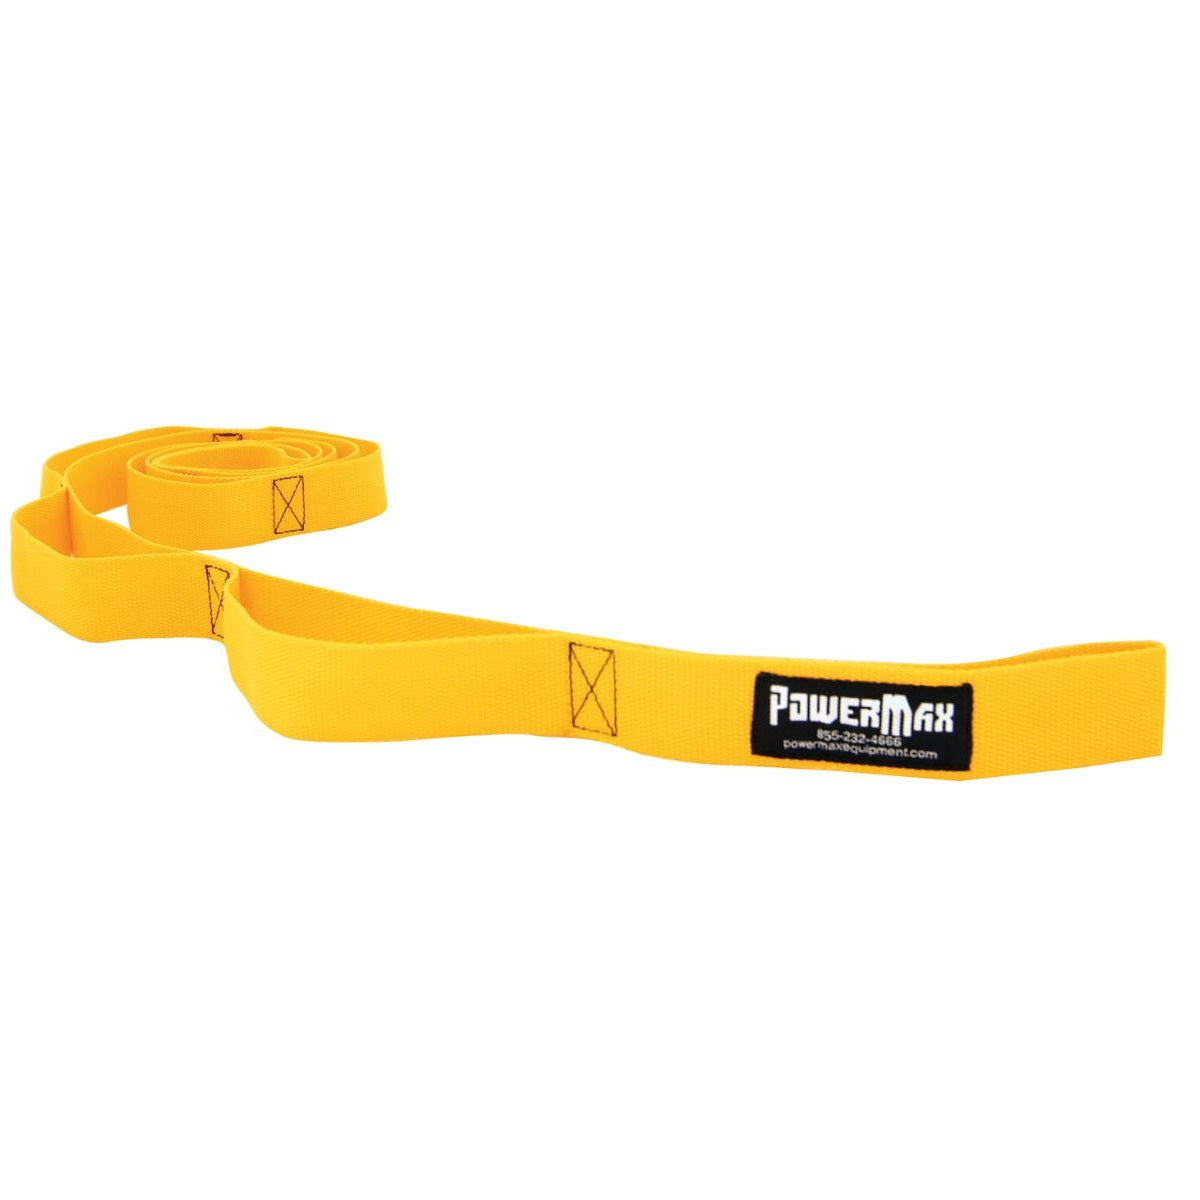 porter stretch out strap unrolled